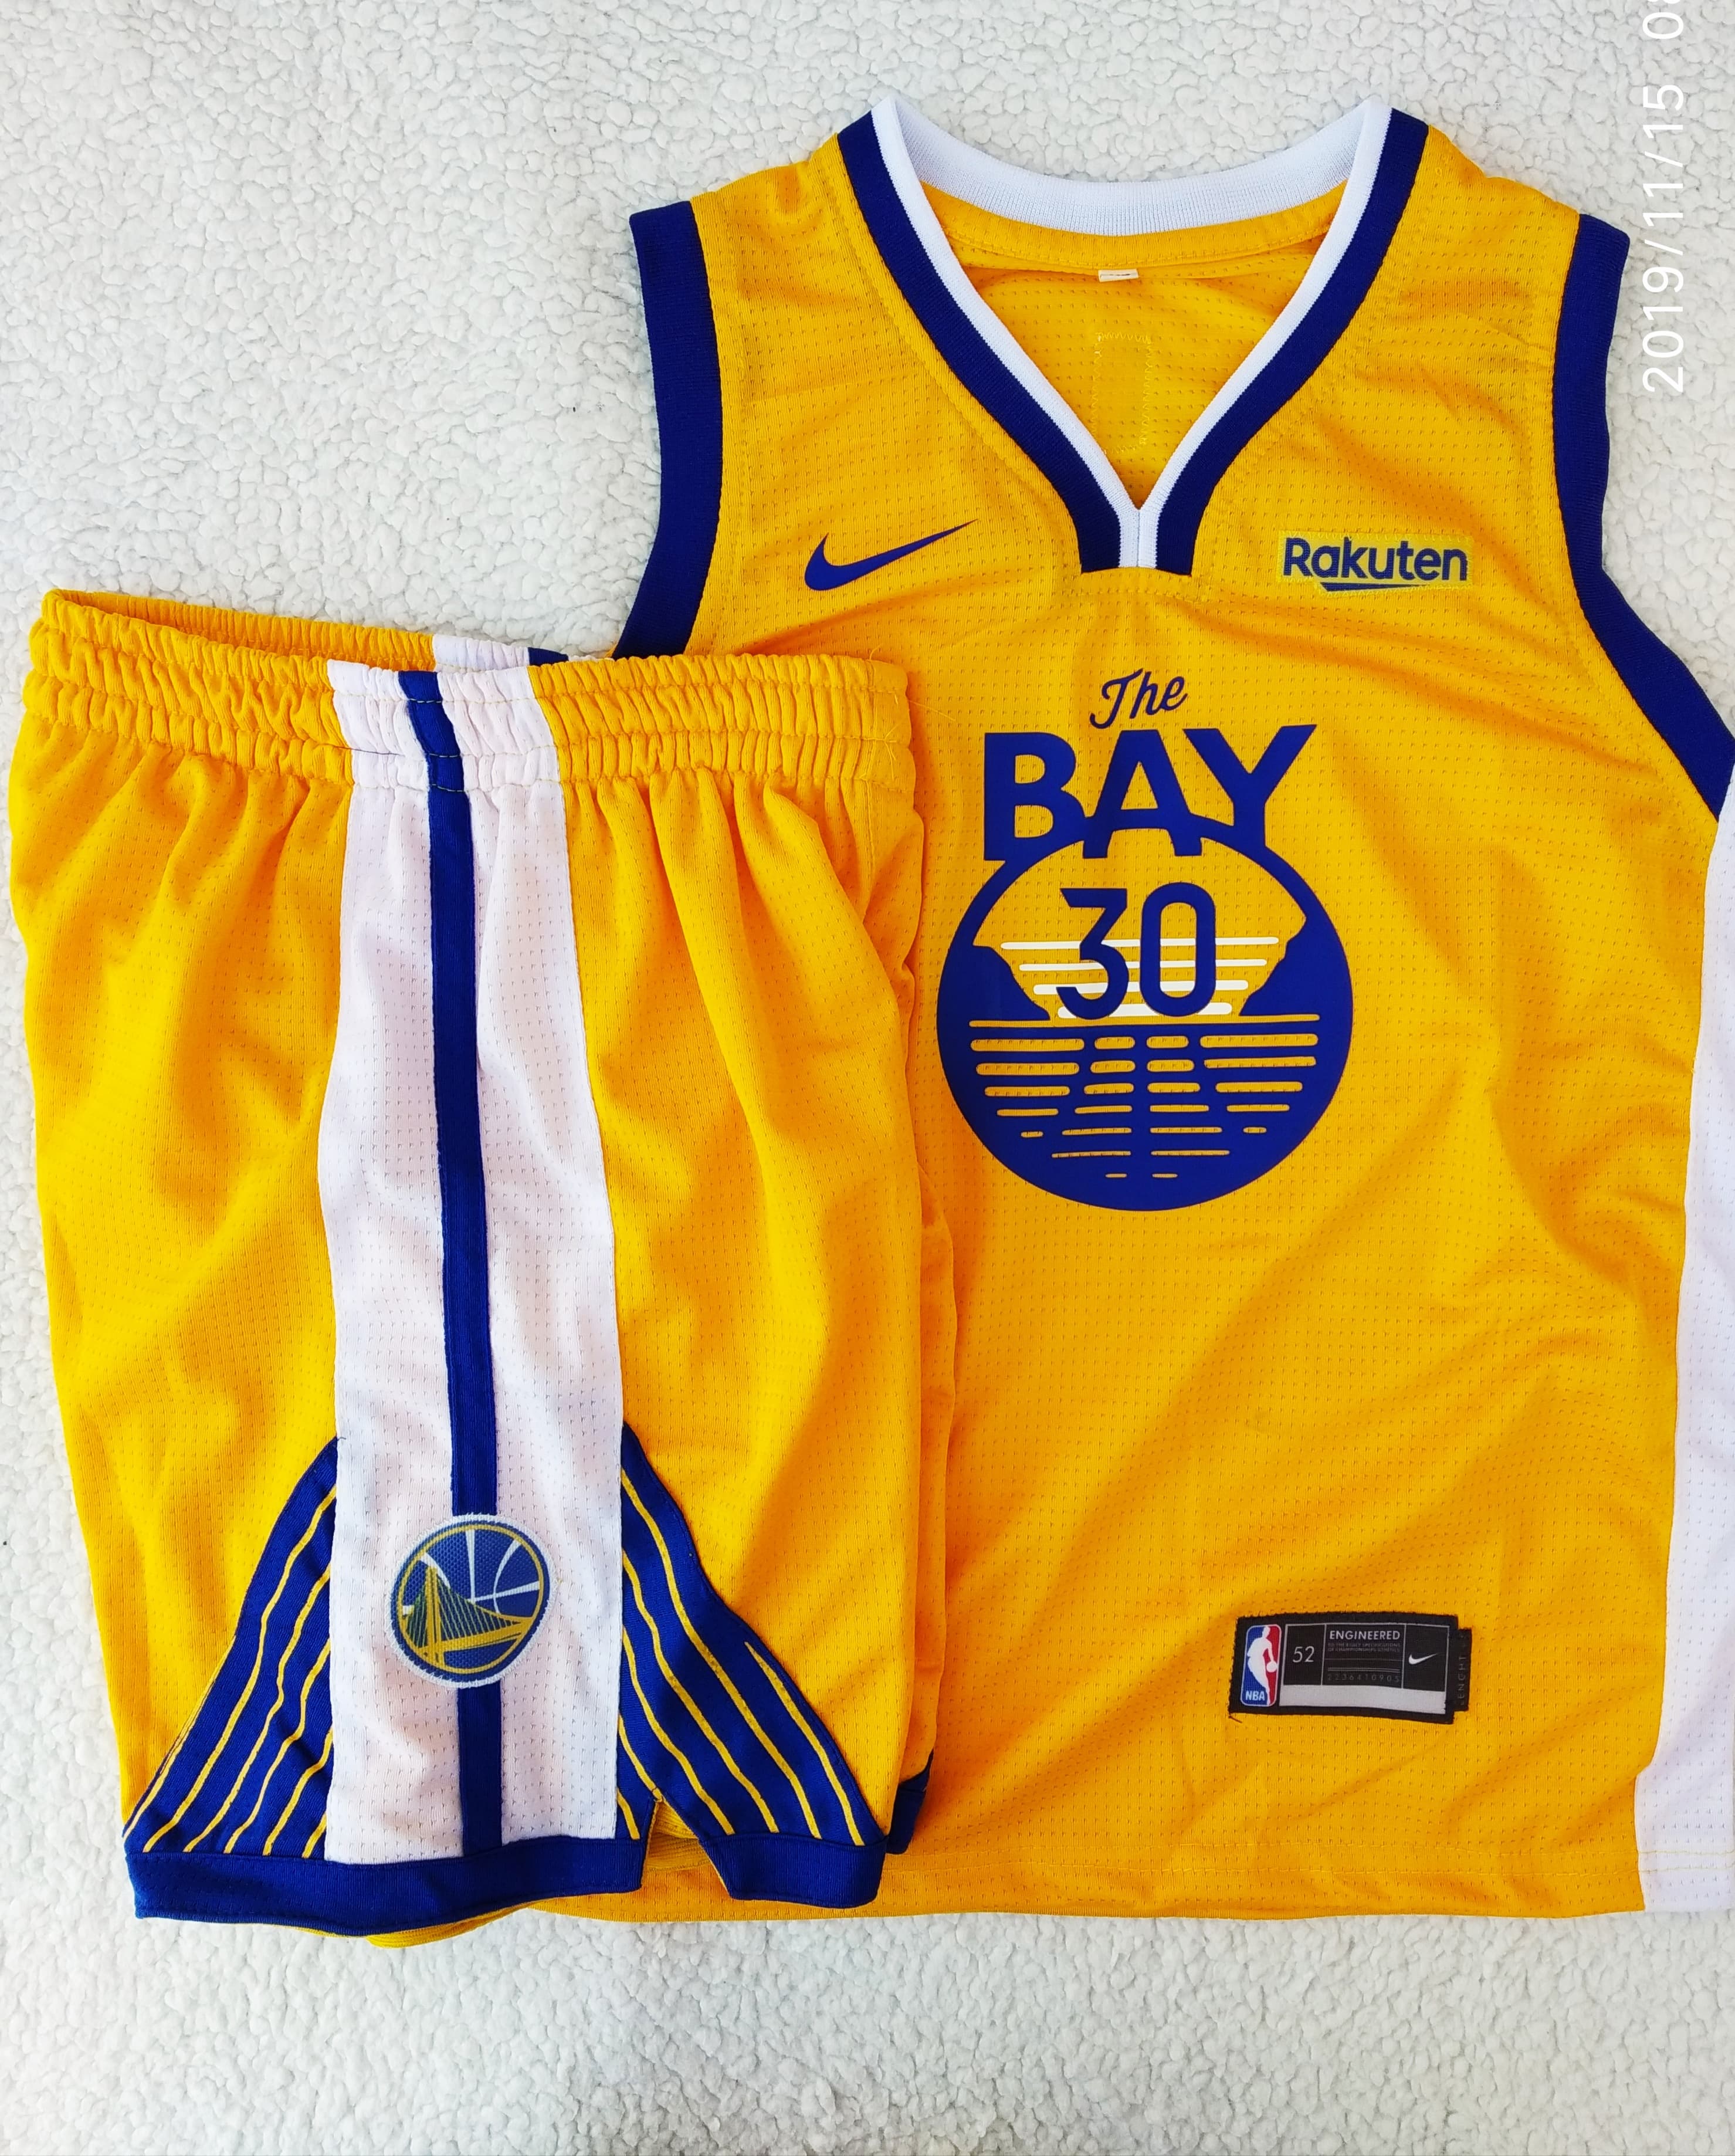 gsw jersey the bay